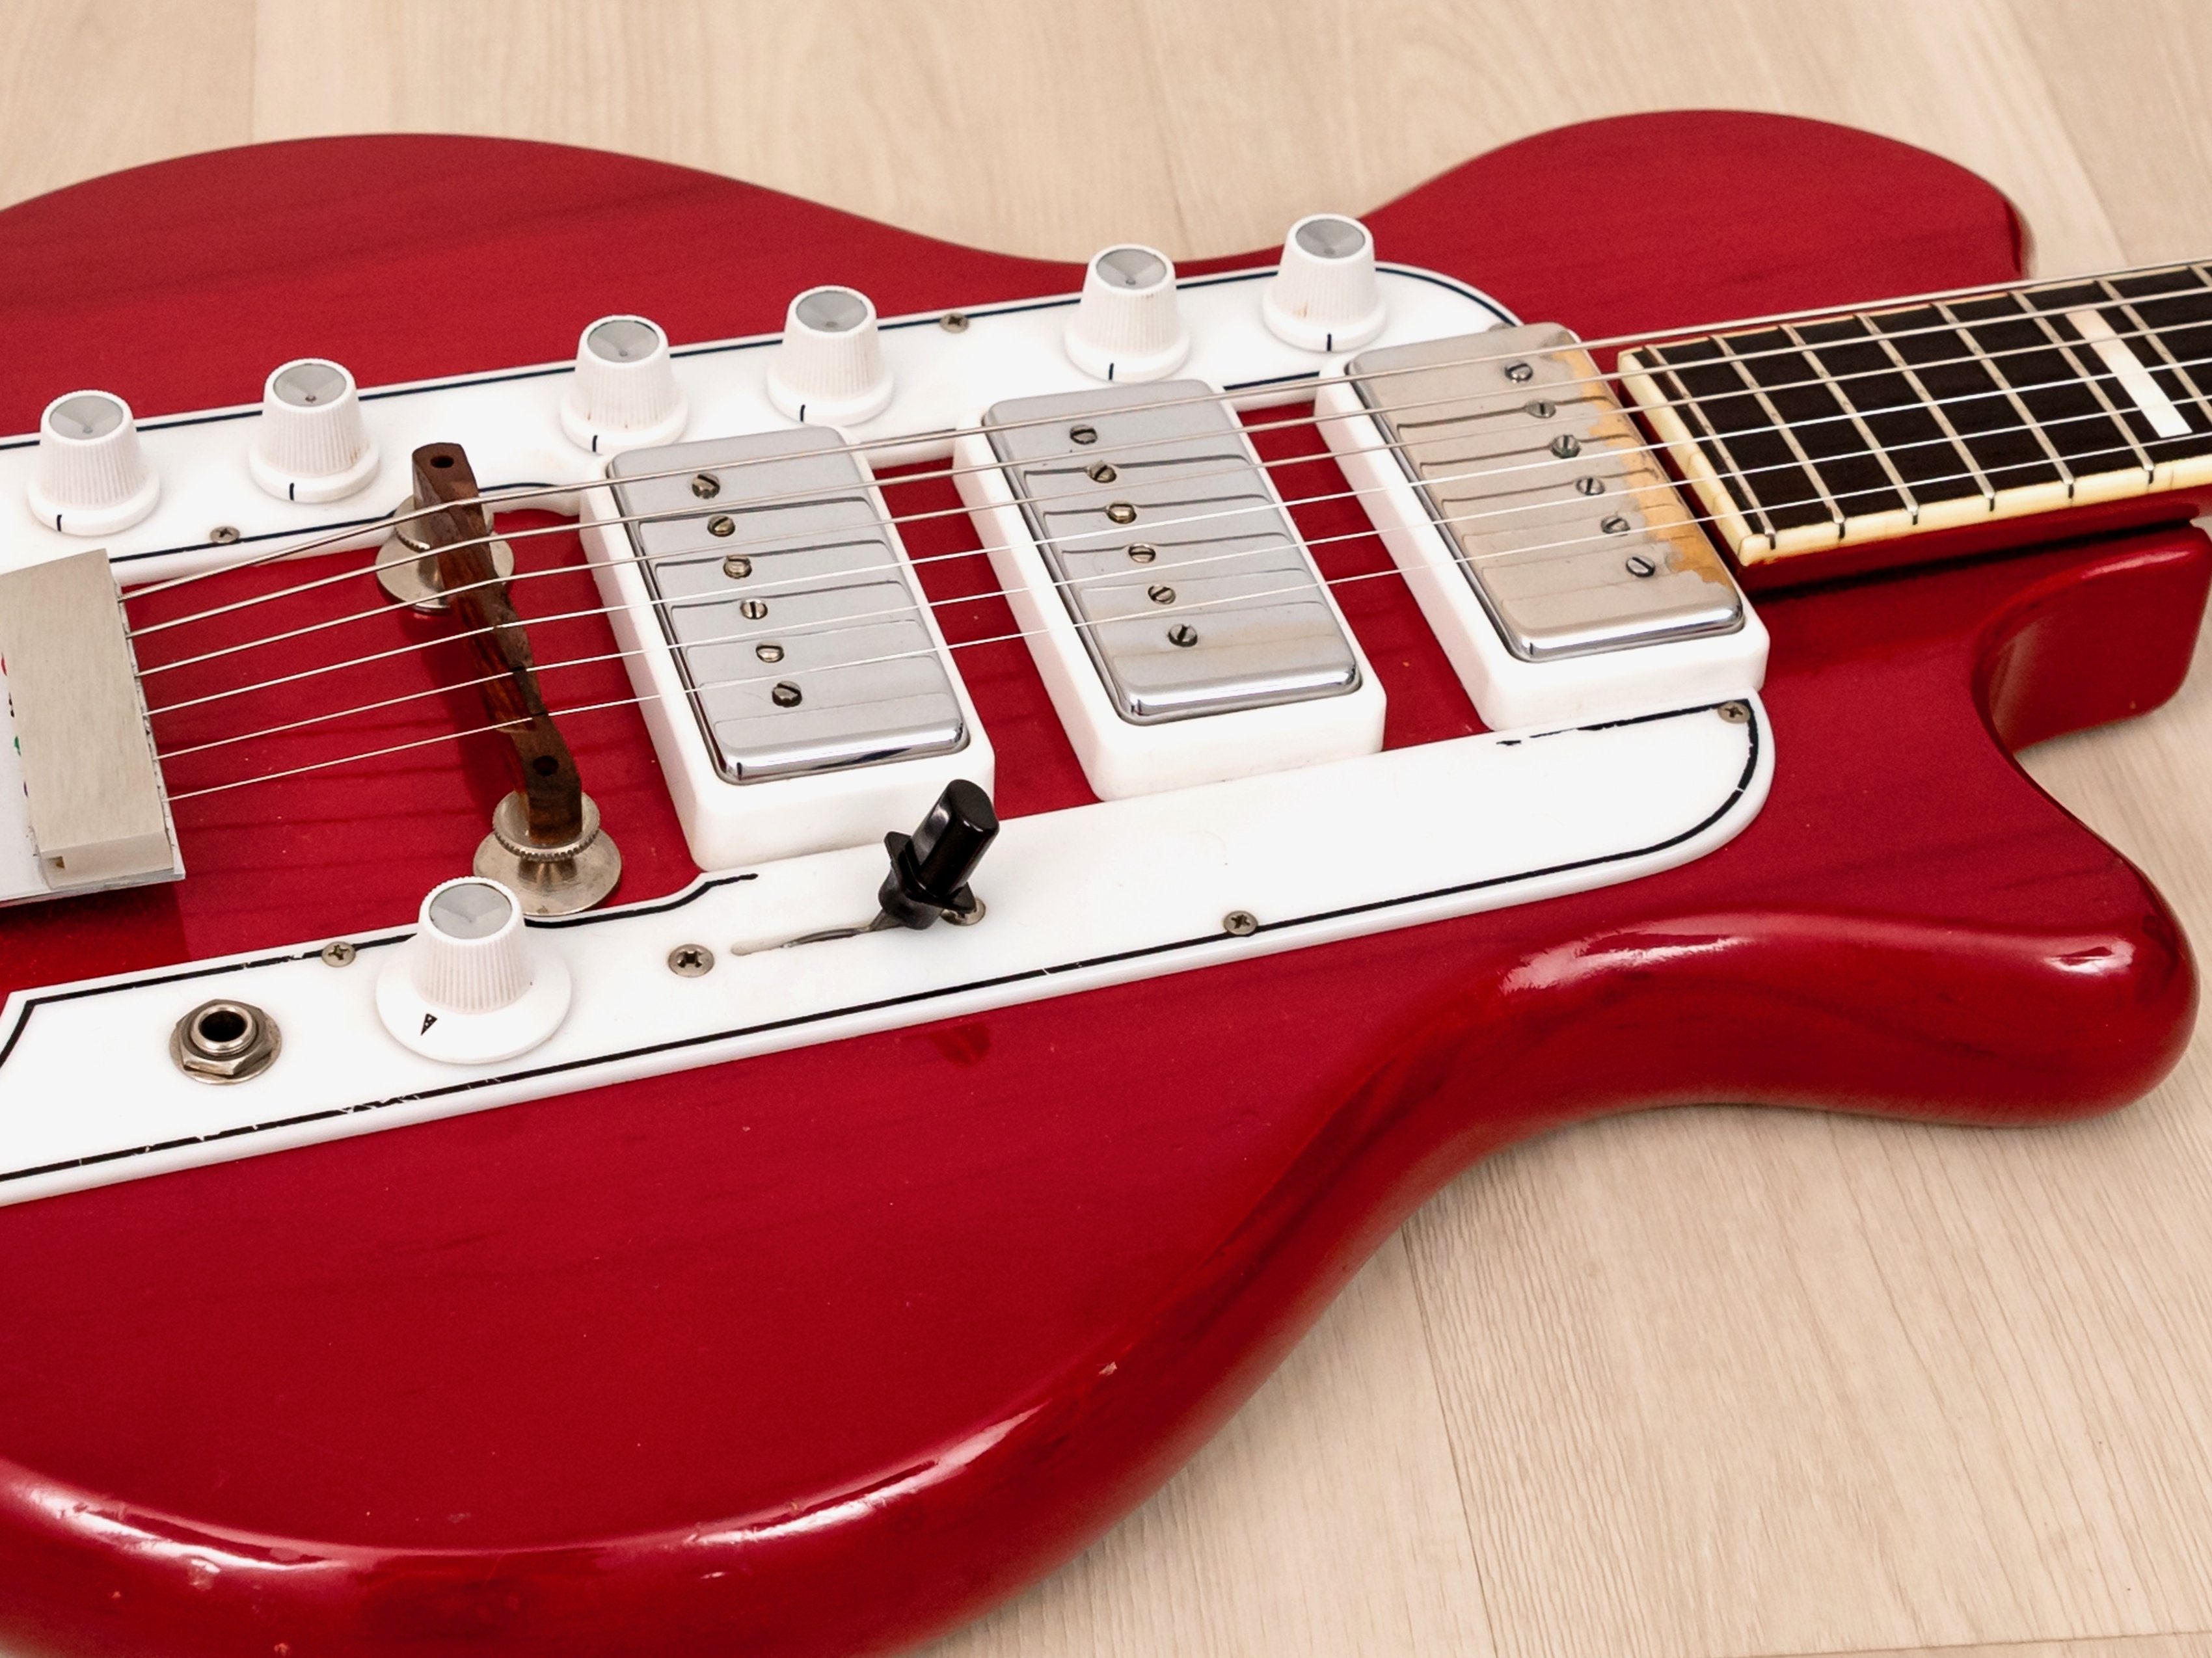 1962 Supro Airline Town & Country Triple Pickup Vintage Guitar Cherry, USA Valco-Made w/ Case